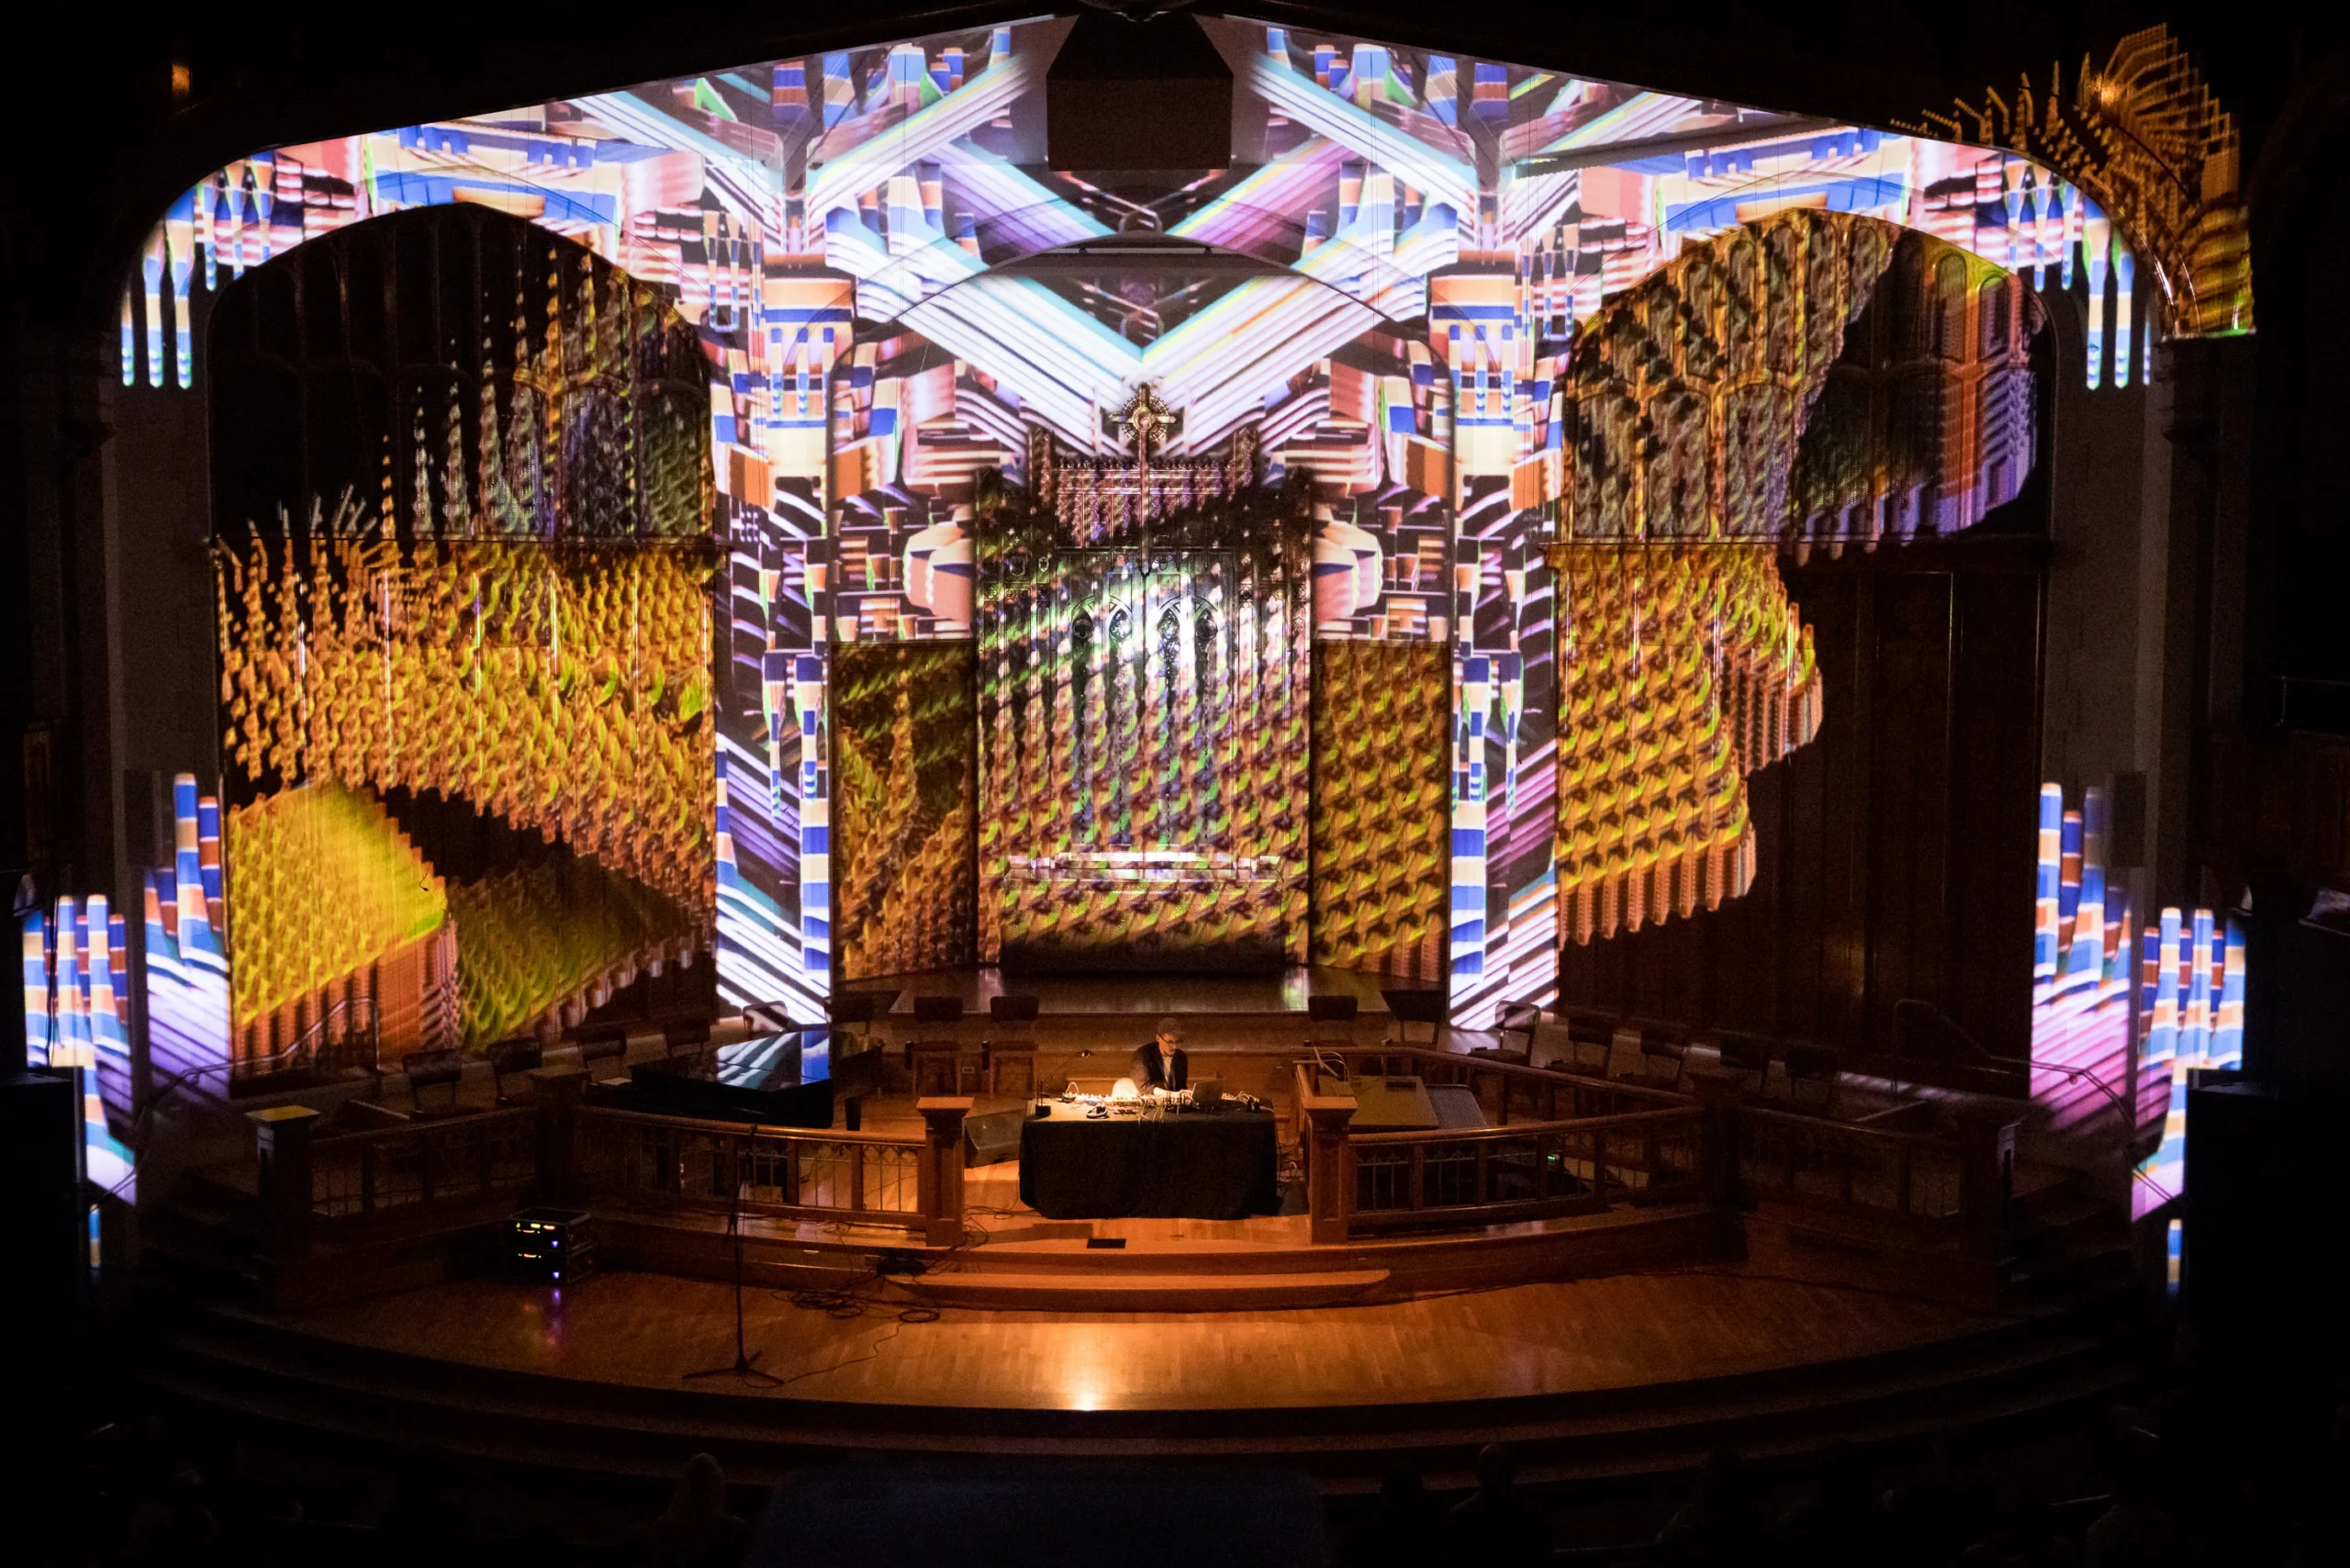 Suzanne Ciani performing while a psychedelic light display shines on the ceiling